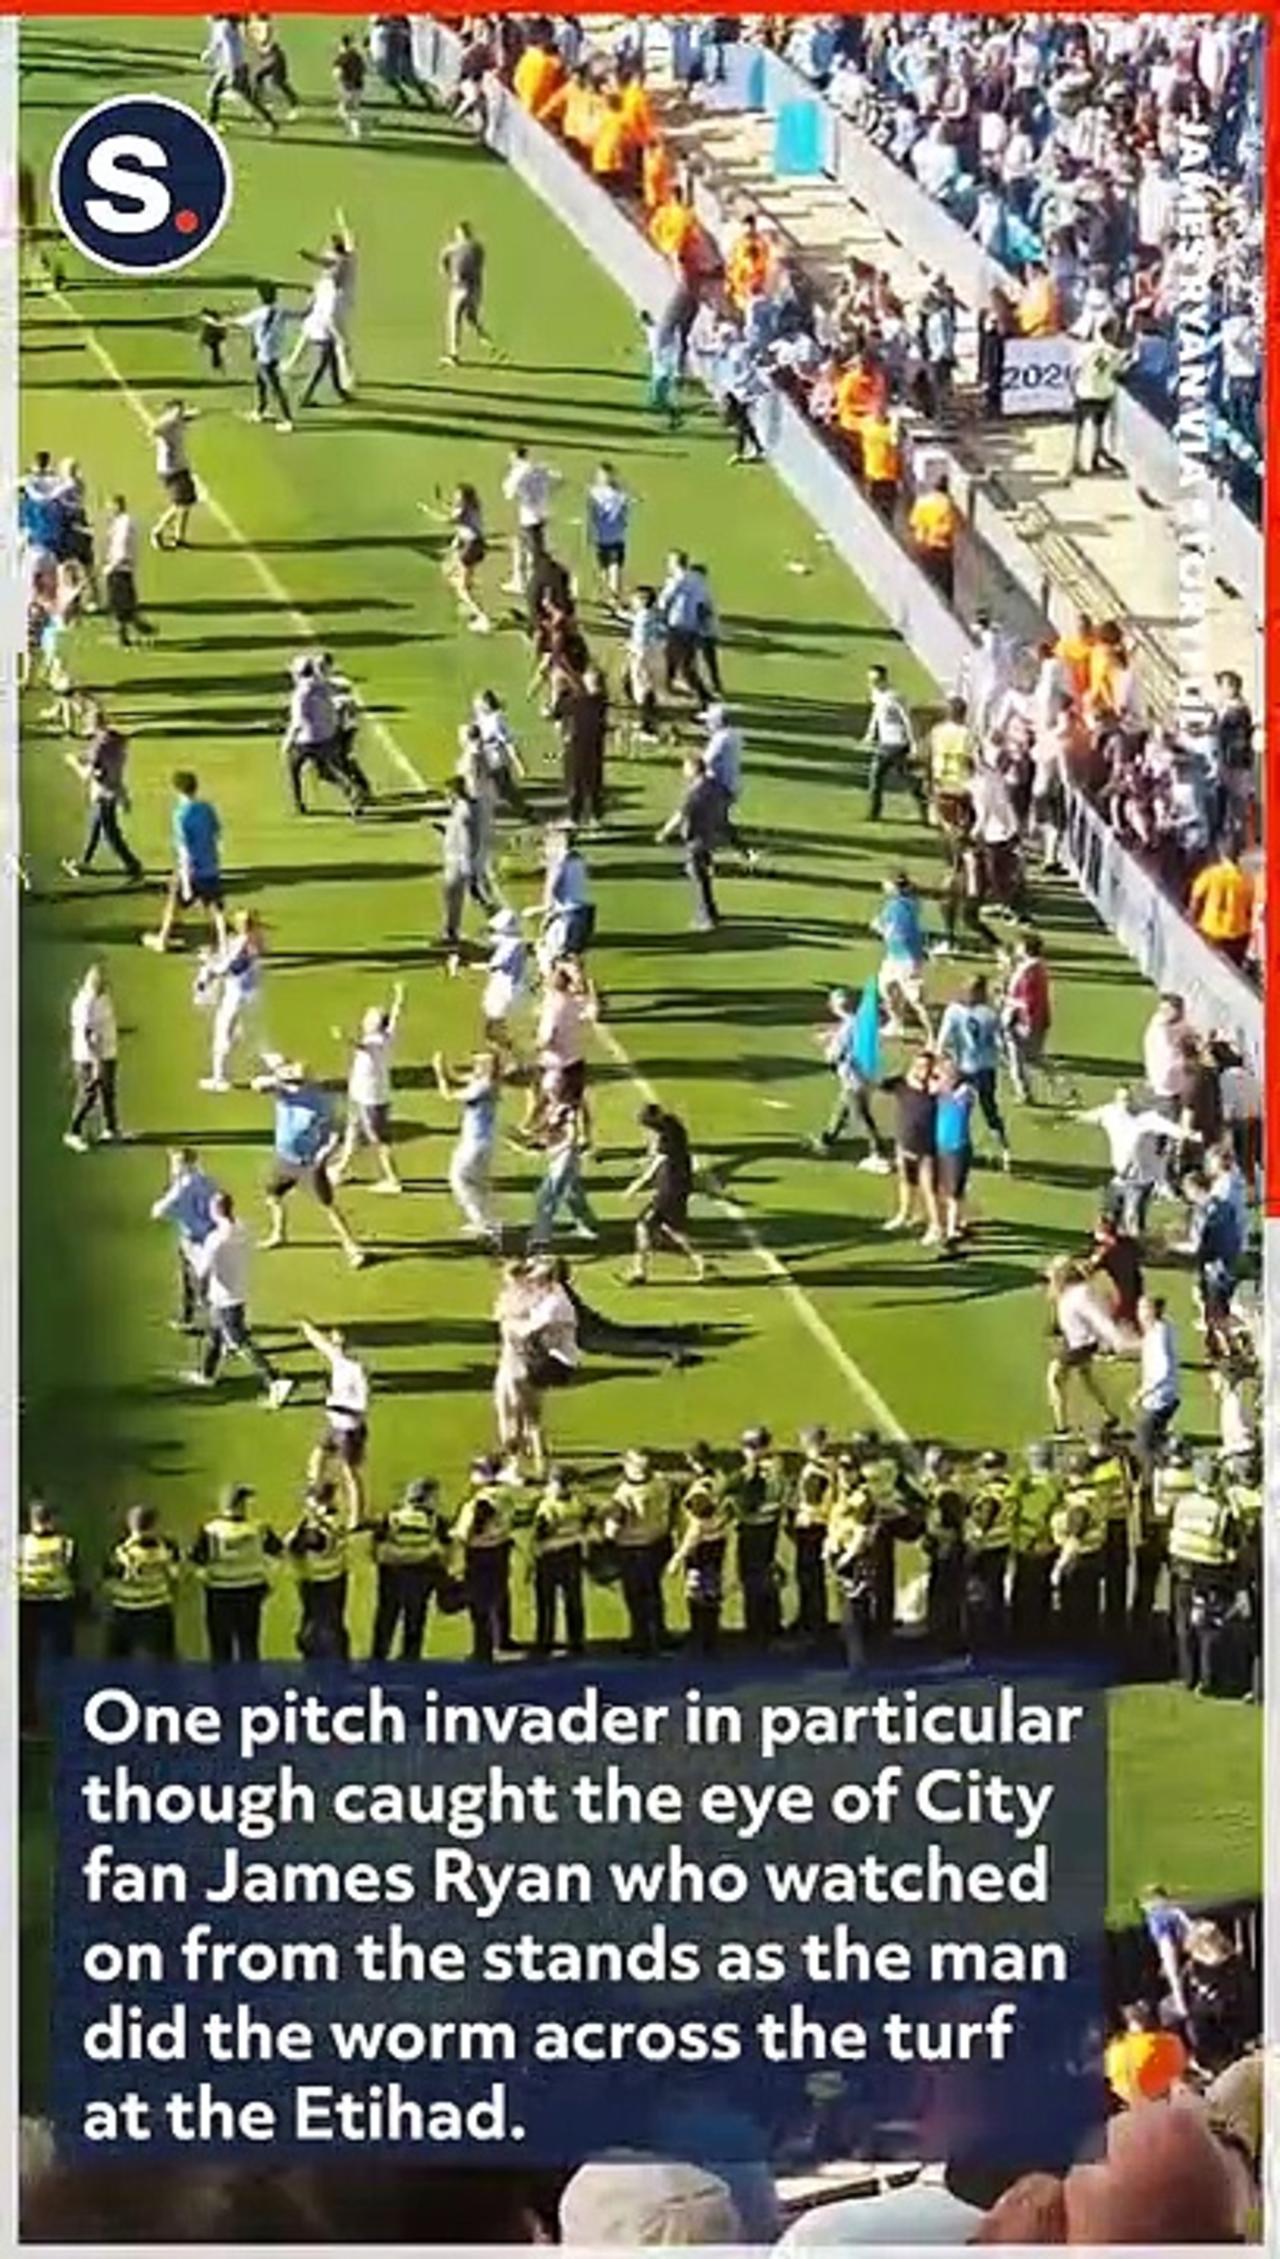 Manchester City Fan Celebrates Title Victory With 'Worm' During Pitch Invasion